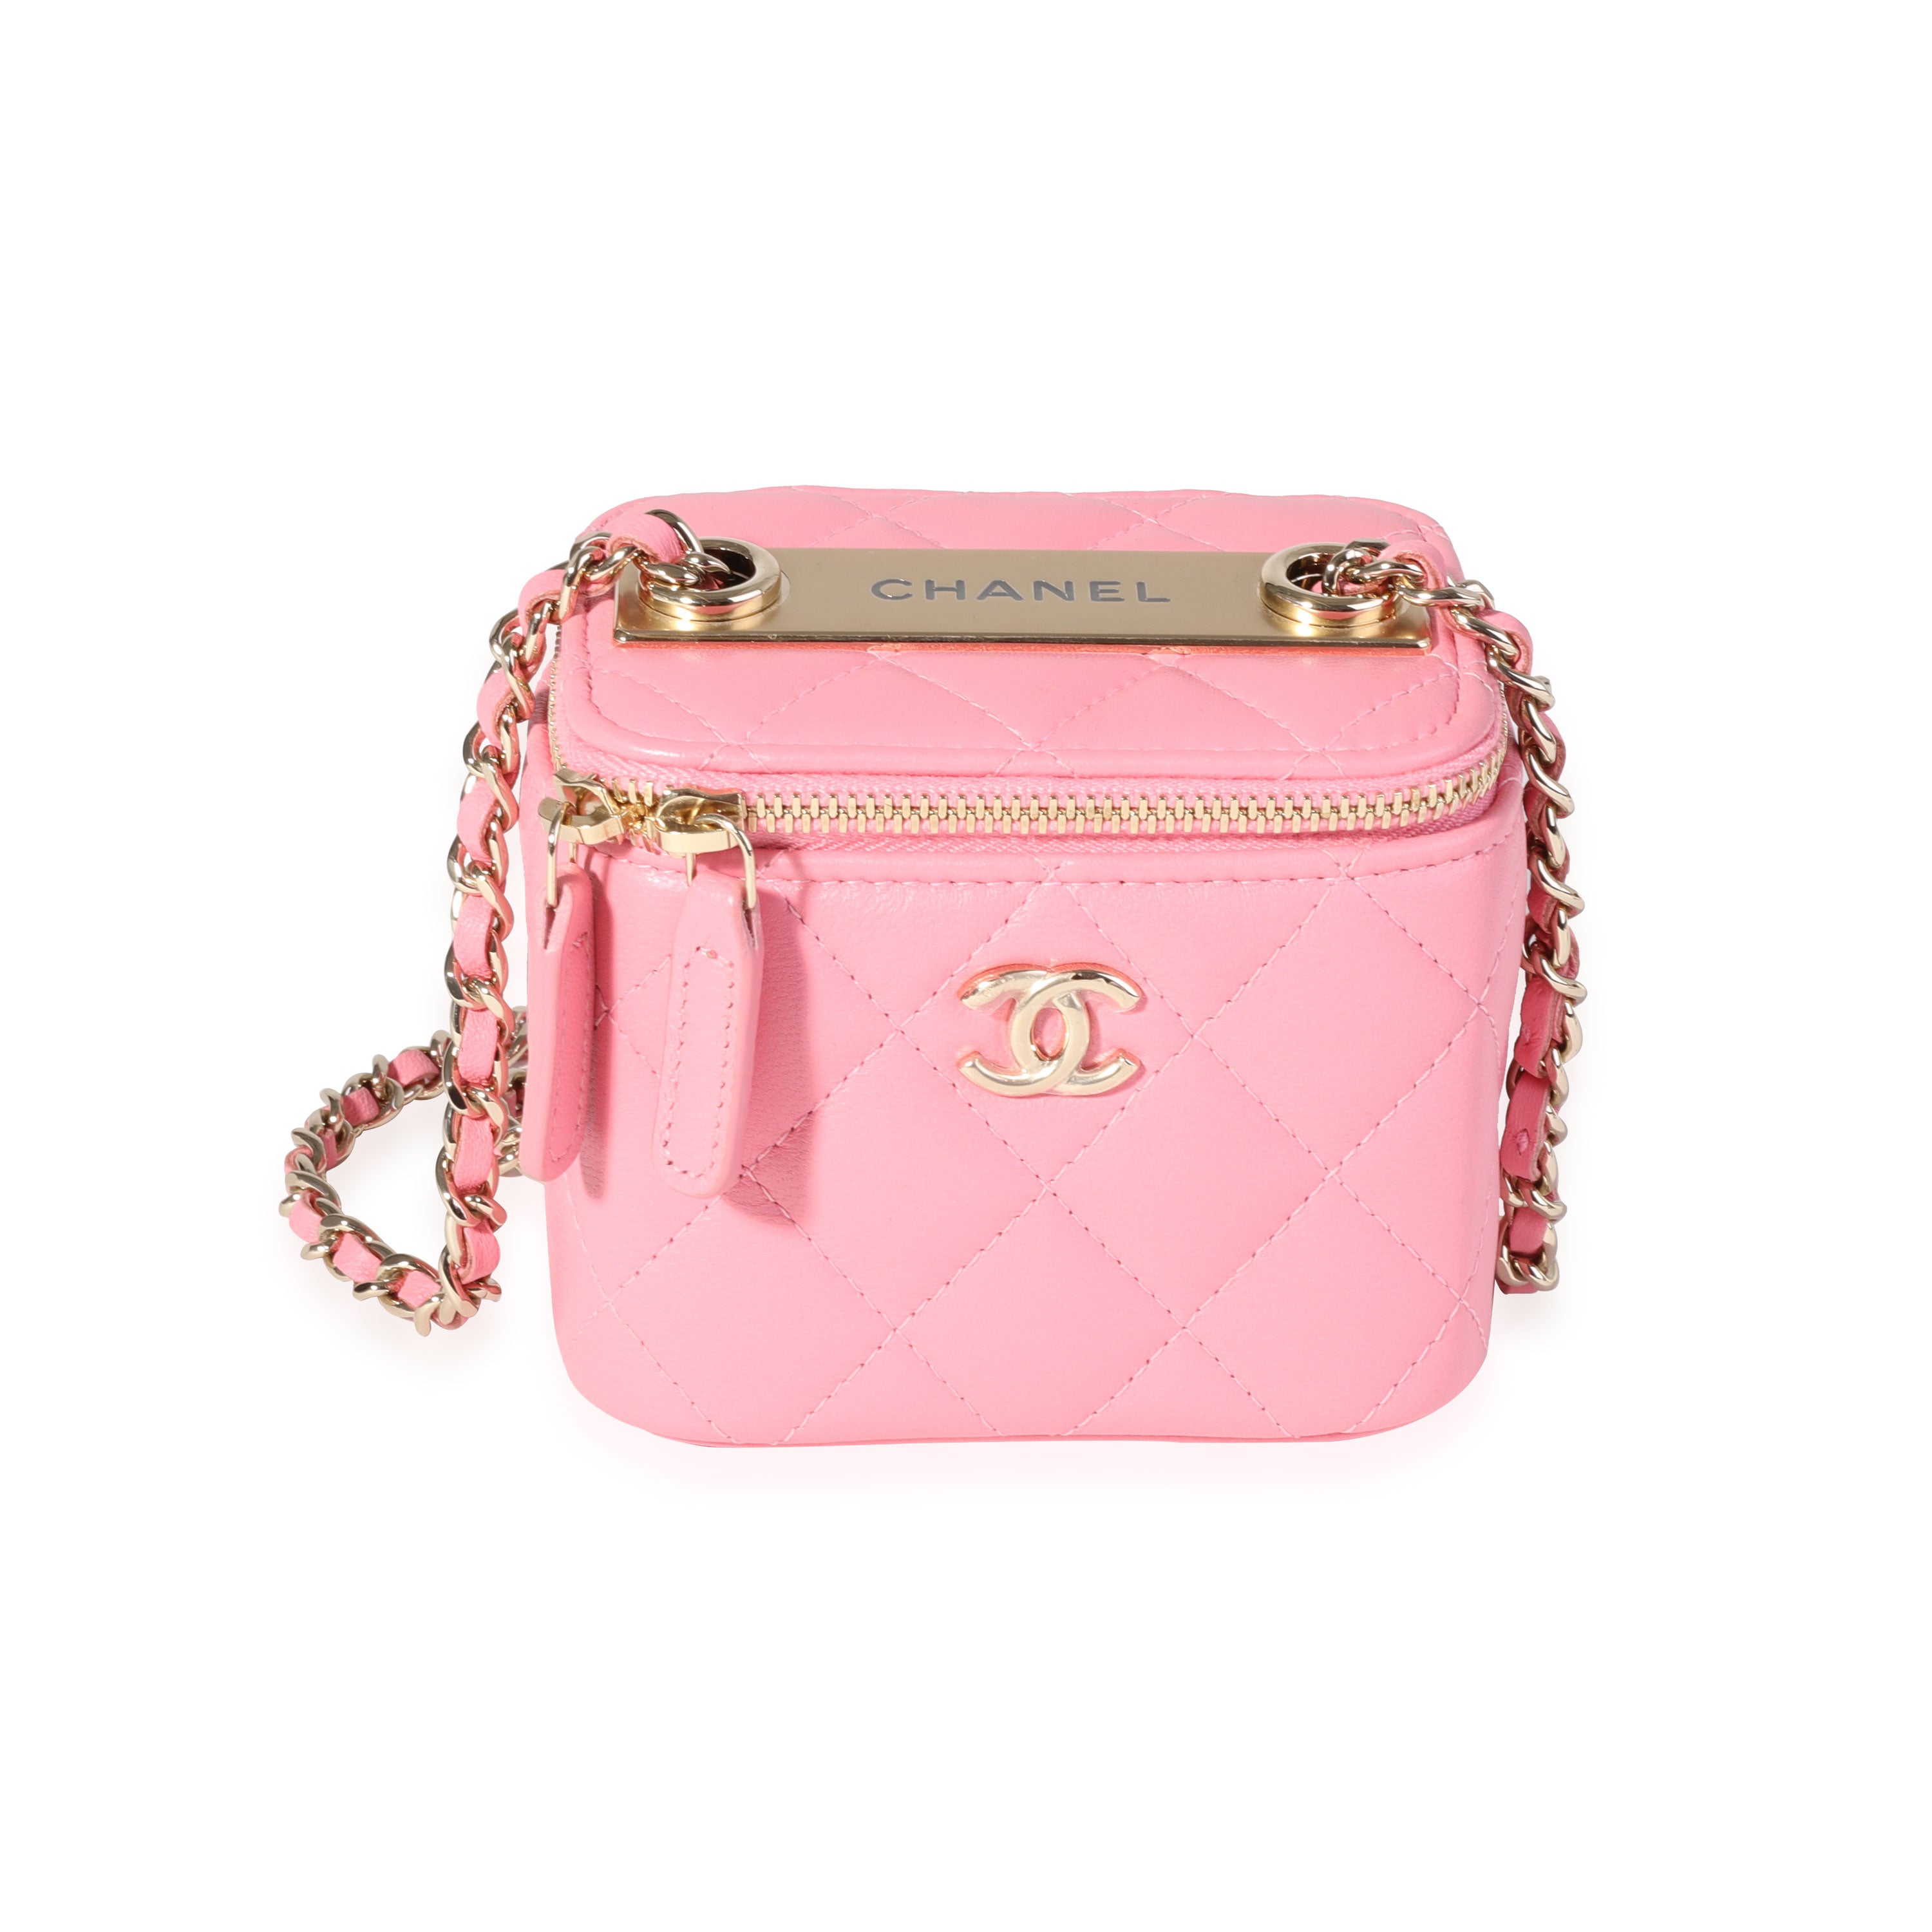 Chanel Light Pink Quilted Lambskin Mini Vanity with Chain, myGemma, JP